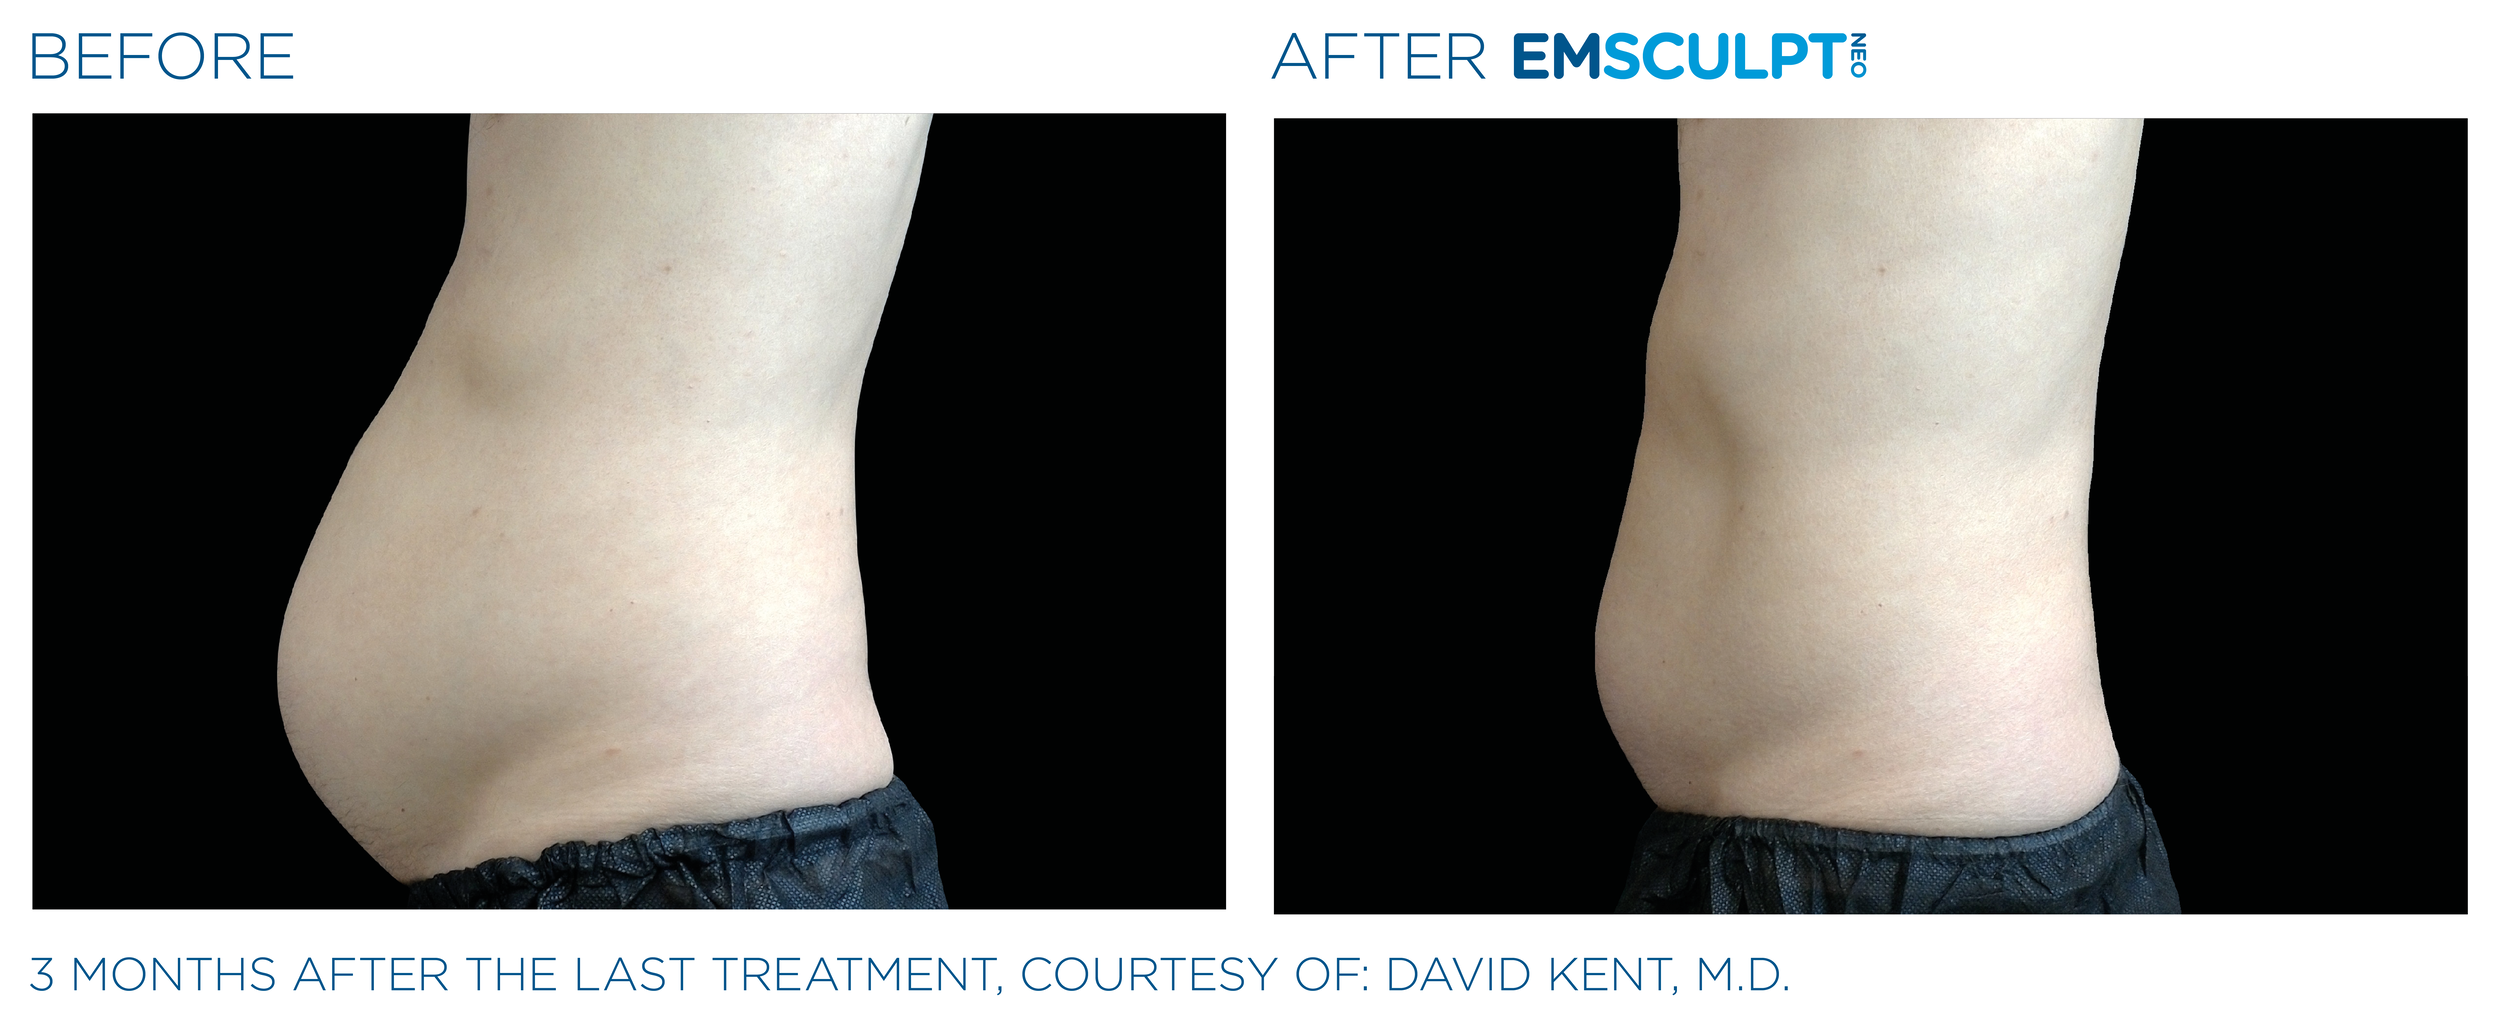 More muscles, less fat! New EMSculpt NEO with radiofrequency